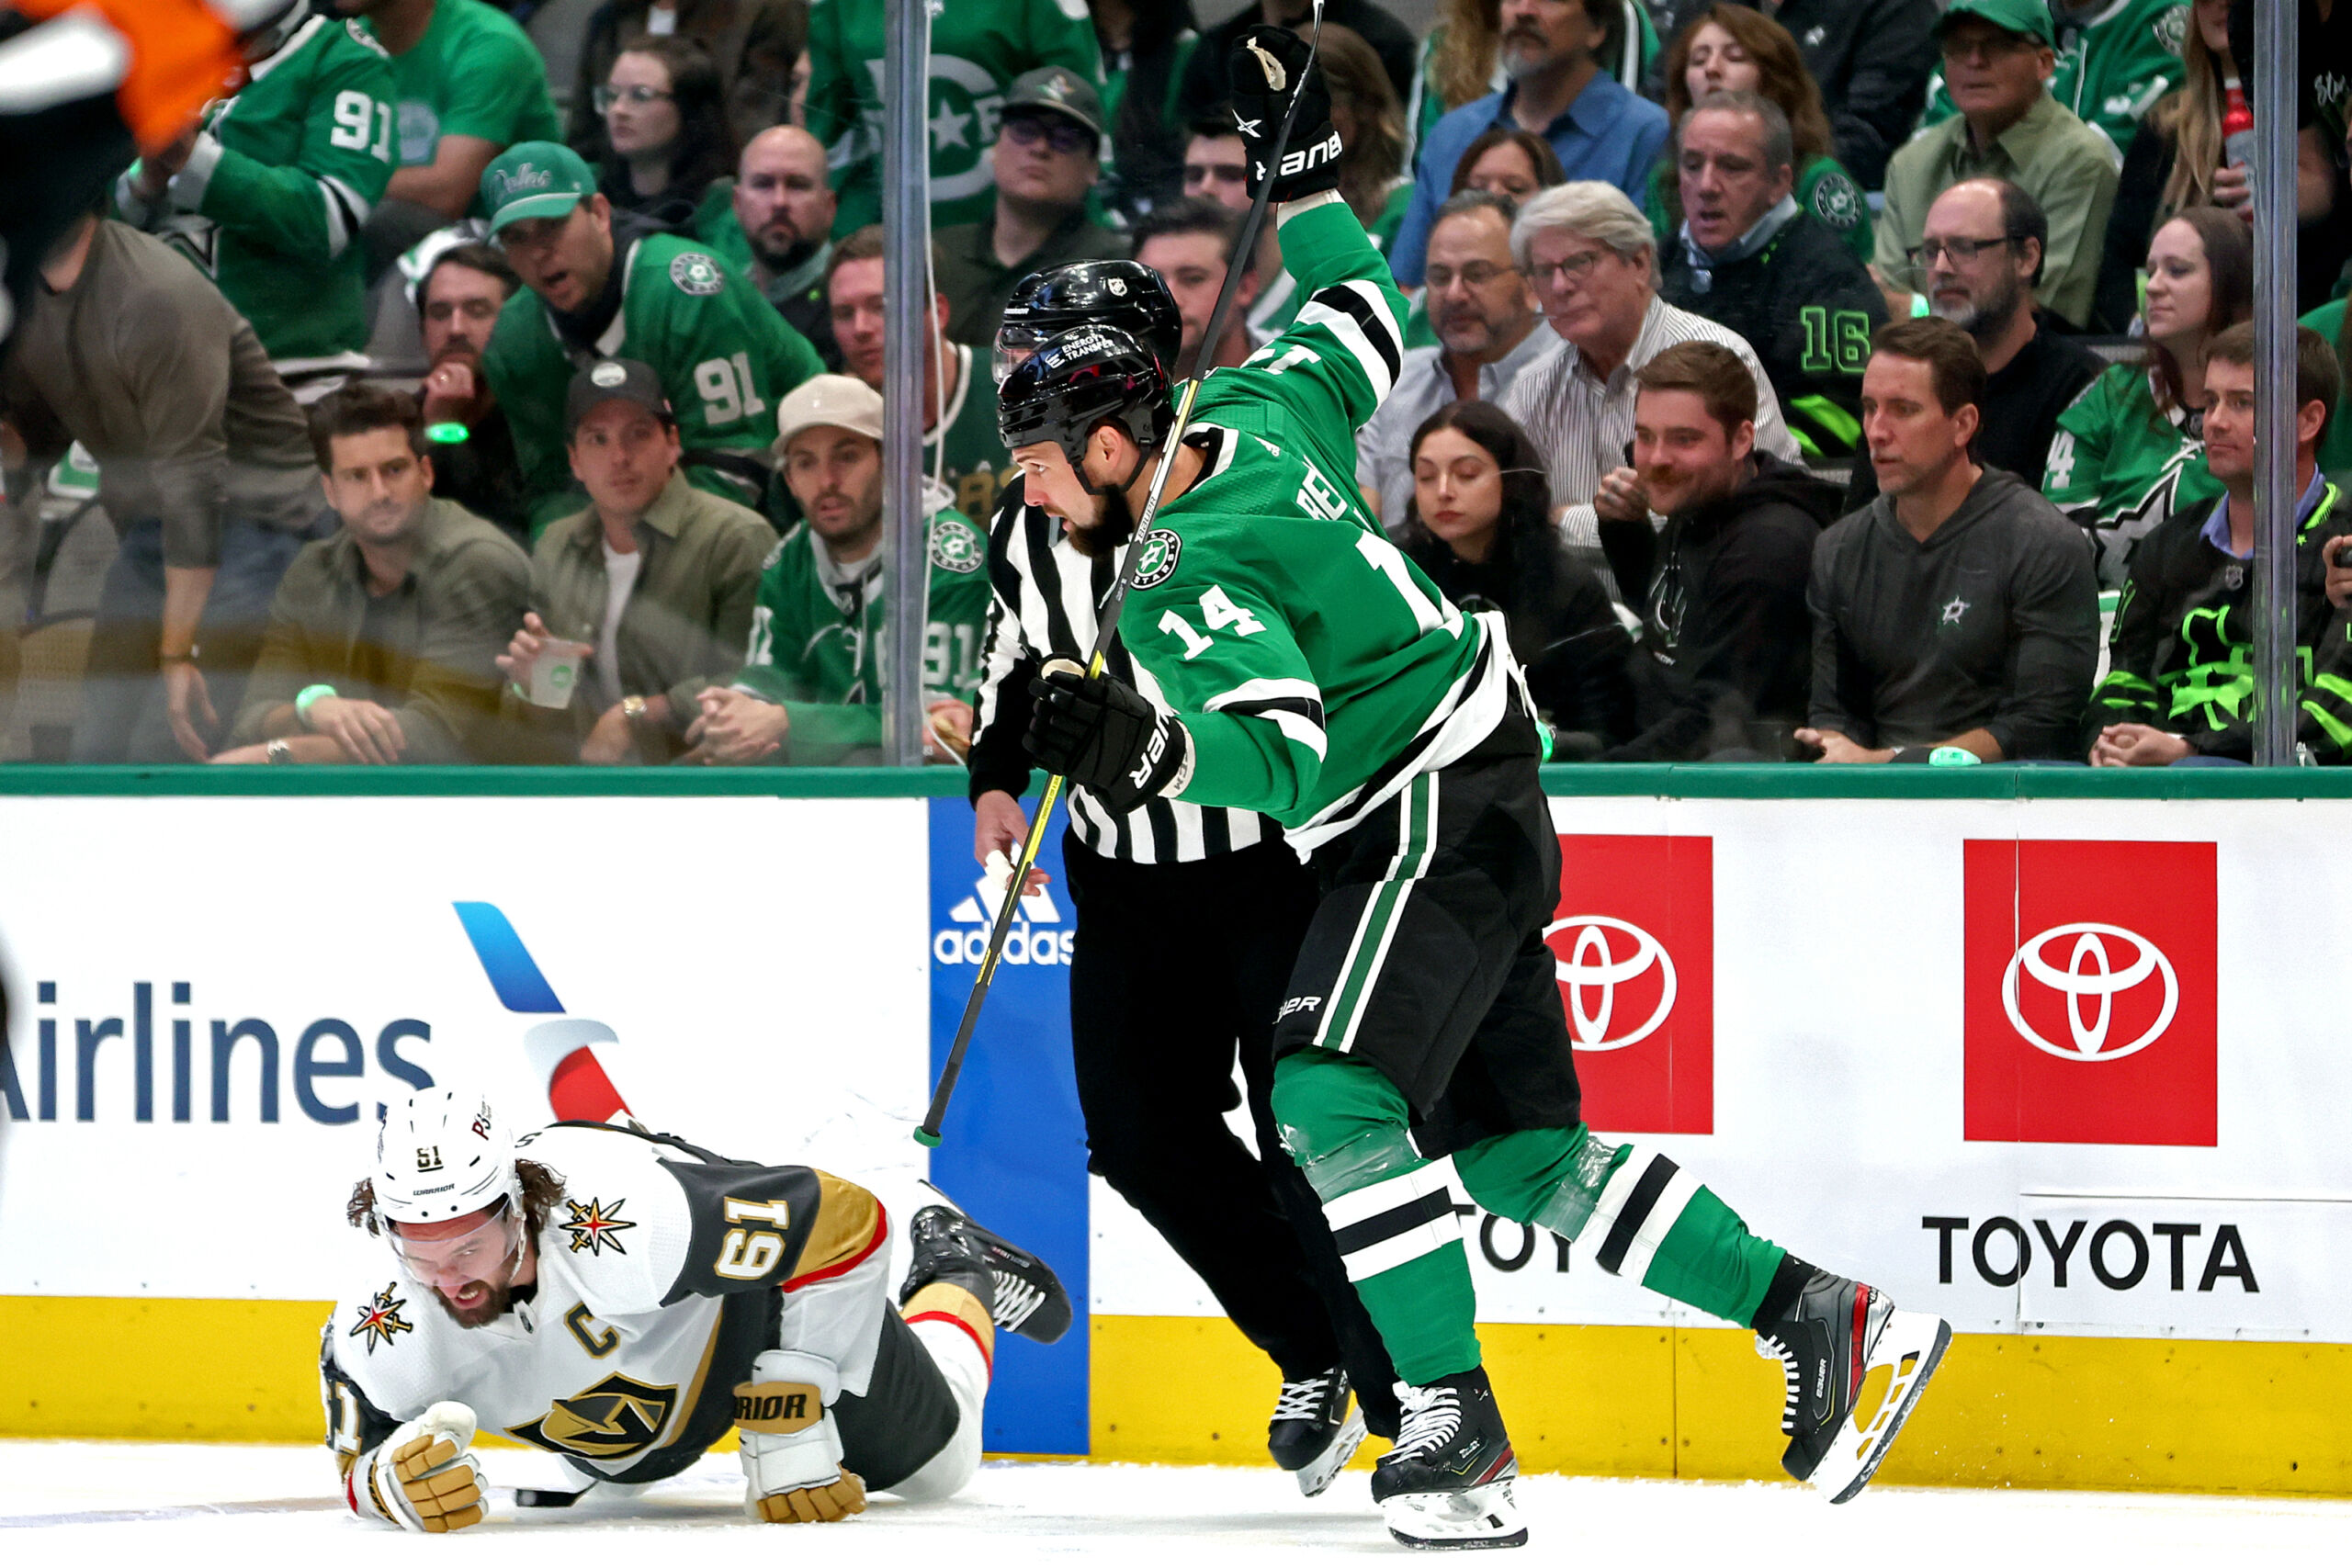 Jamie Benn's cross-check reminds Red Wings fans of hit to Dylan Larkin